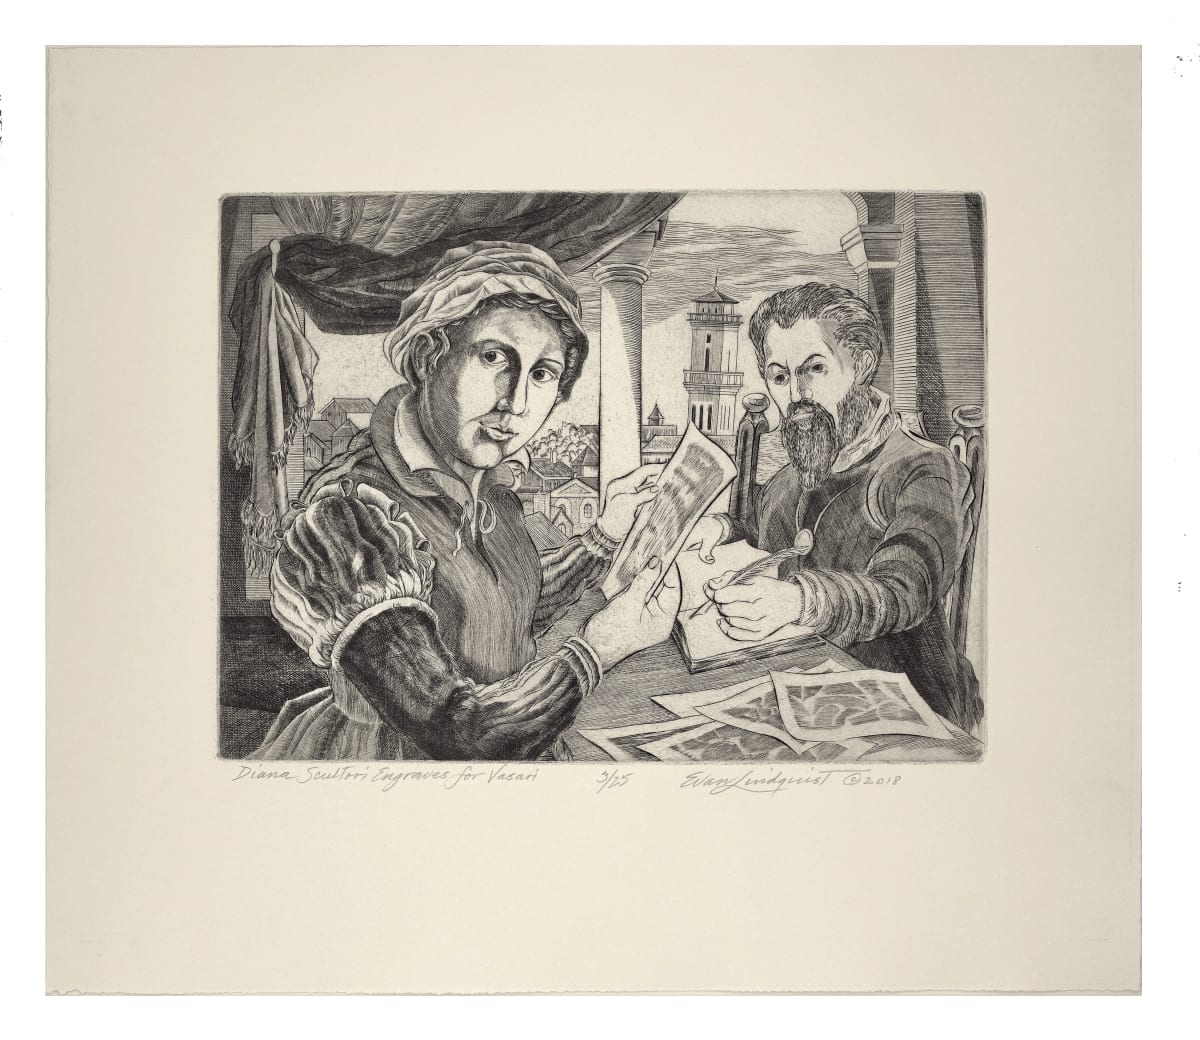 Diana Scultori Engraves for Vasari, 3/25  Image: © Evan Lindquist / Artists Rights Society (ARS), New York